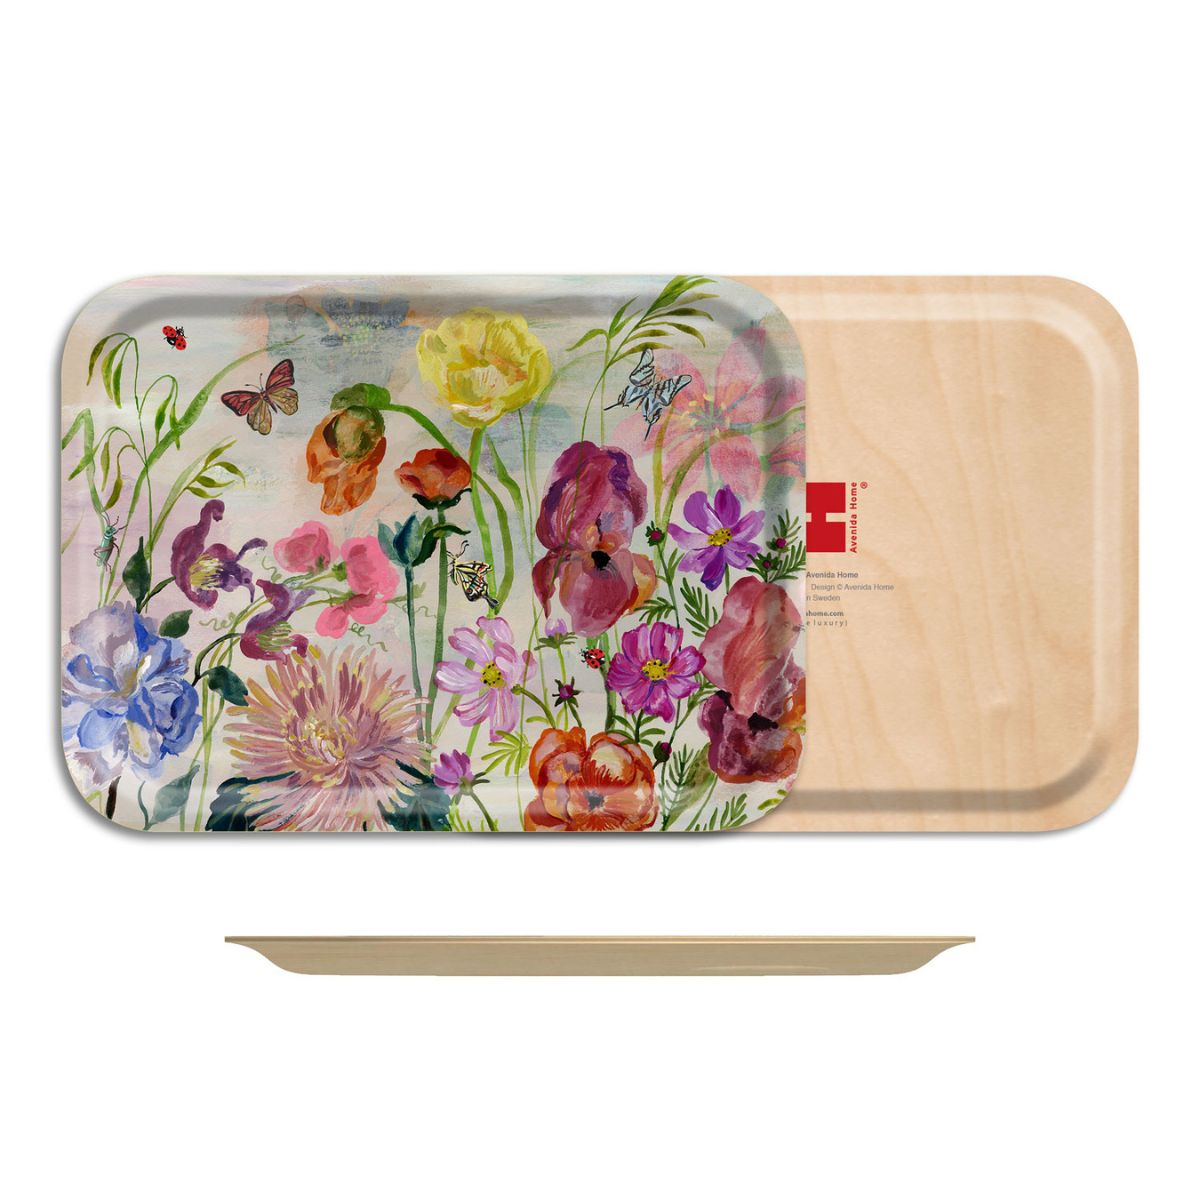 Nathalie Lete Flowers Small Rectangle Birch Wood Tray